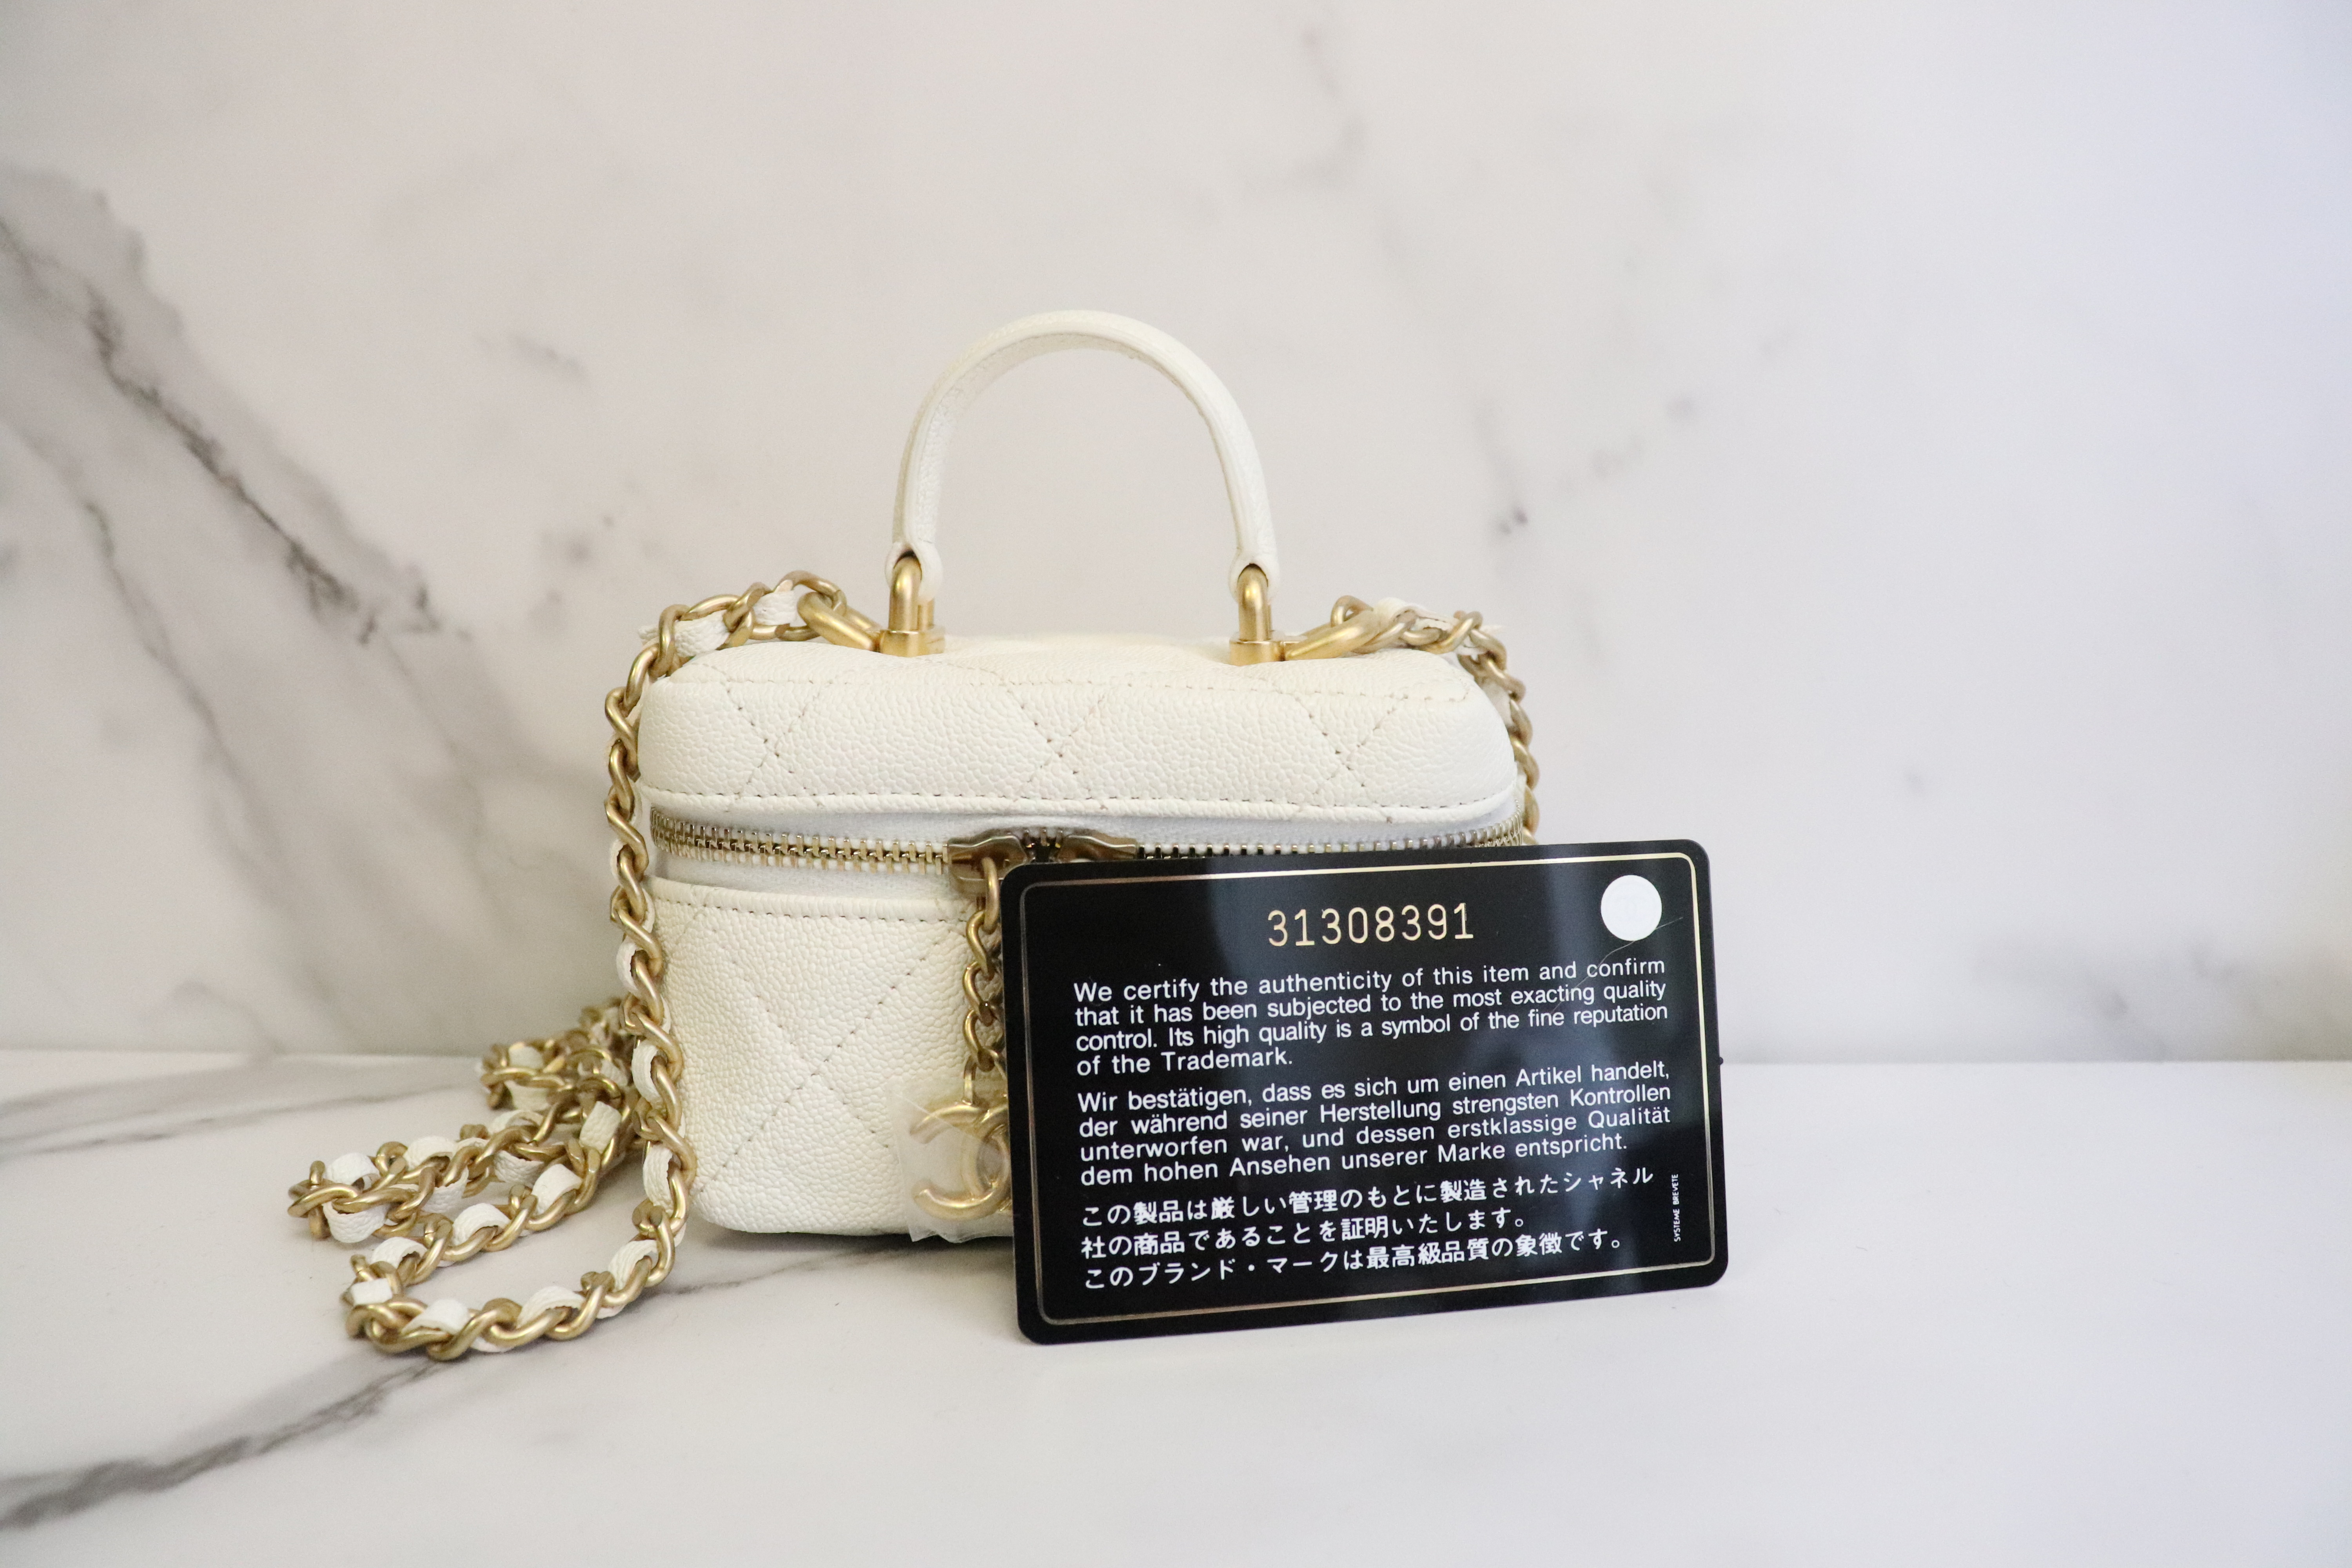 Chanel Round Vanity with Chain, Pink Caviar with Gold Hardware, New in Box  GA001 - Julia Rose Boston